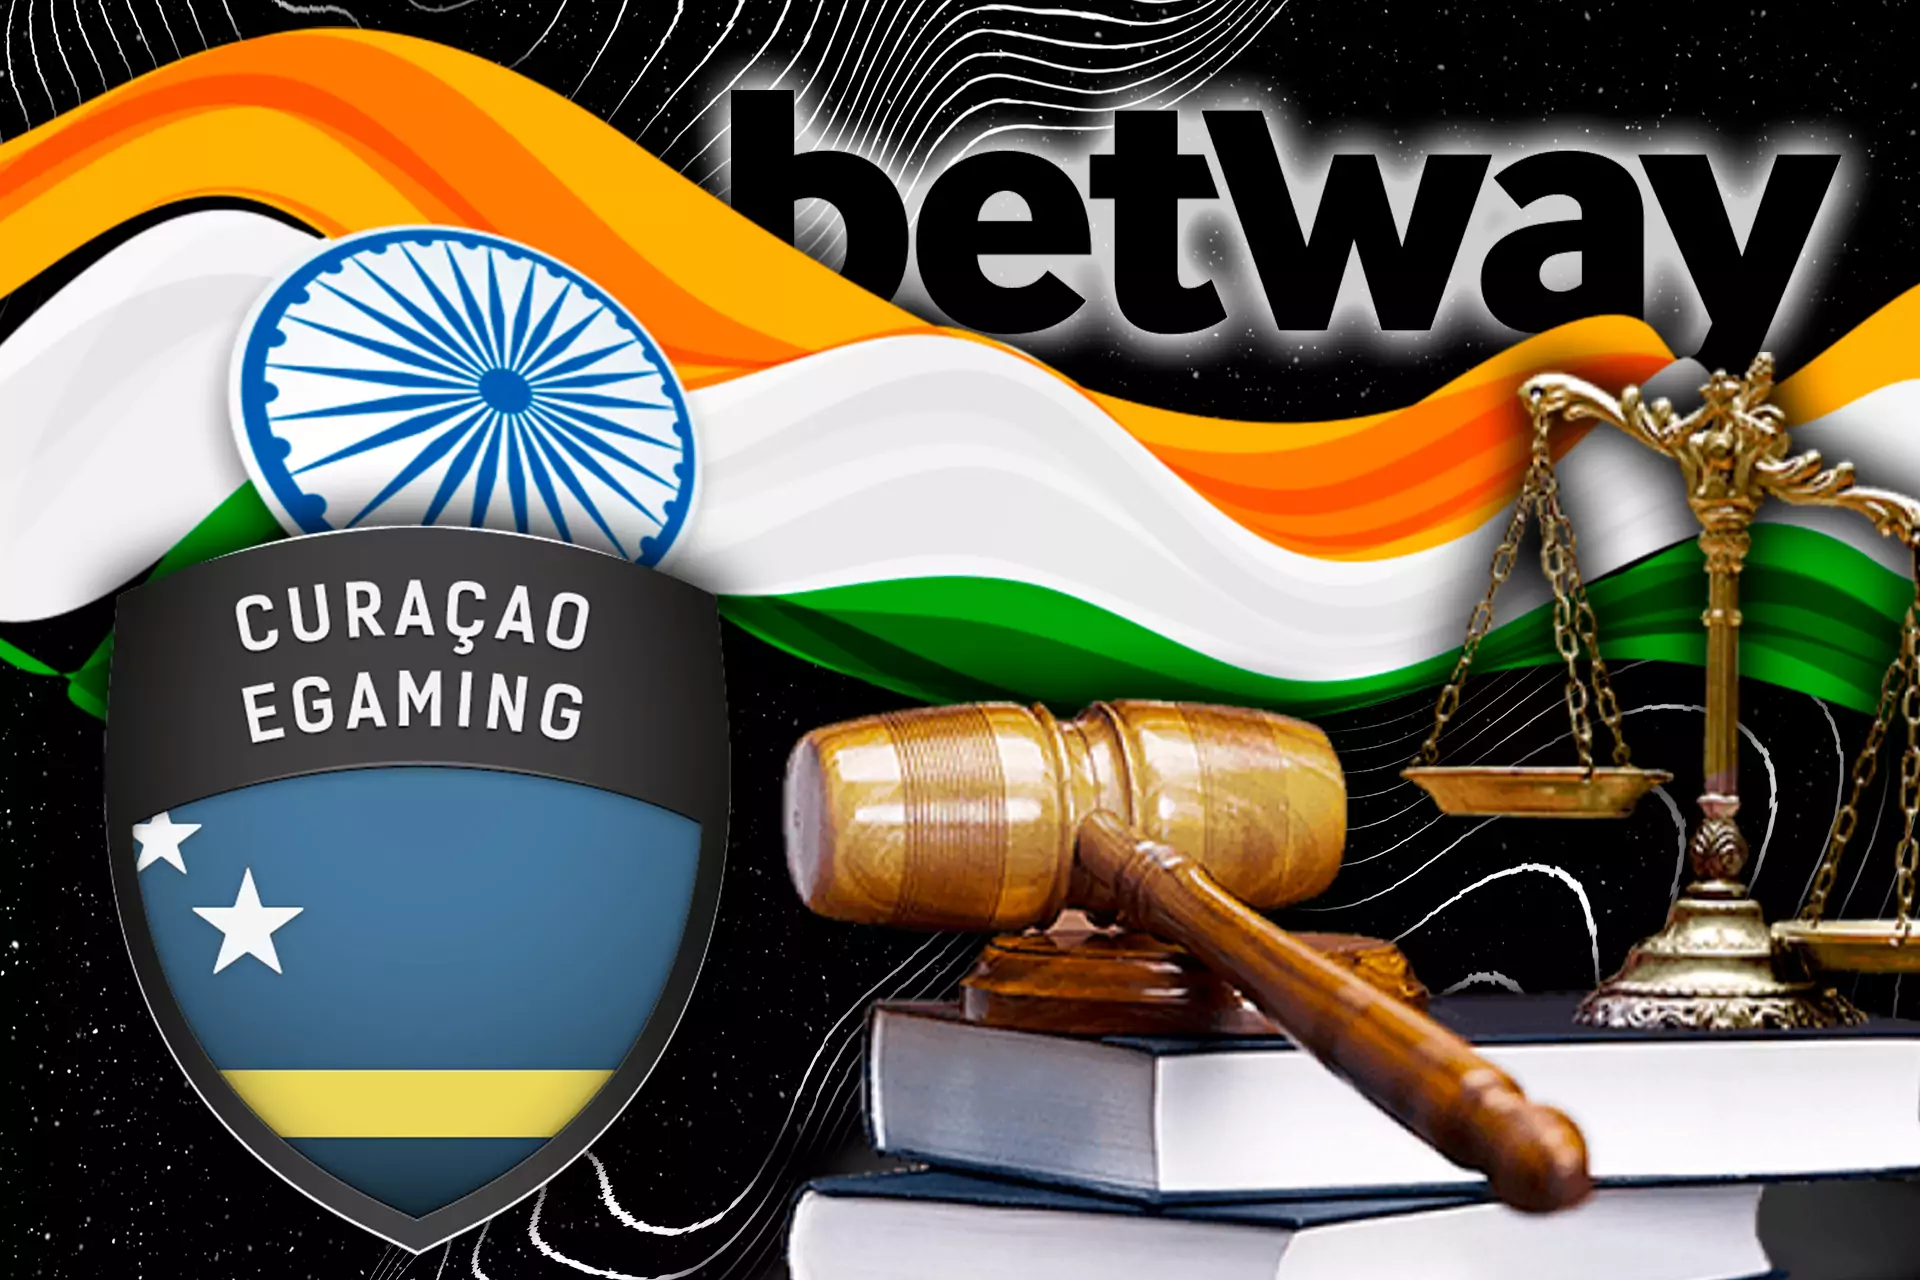 Betway is officially licensed and legal in India.